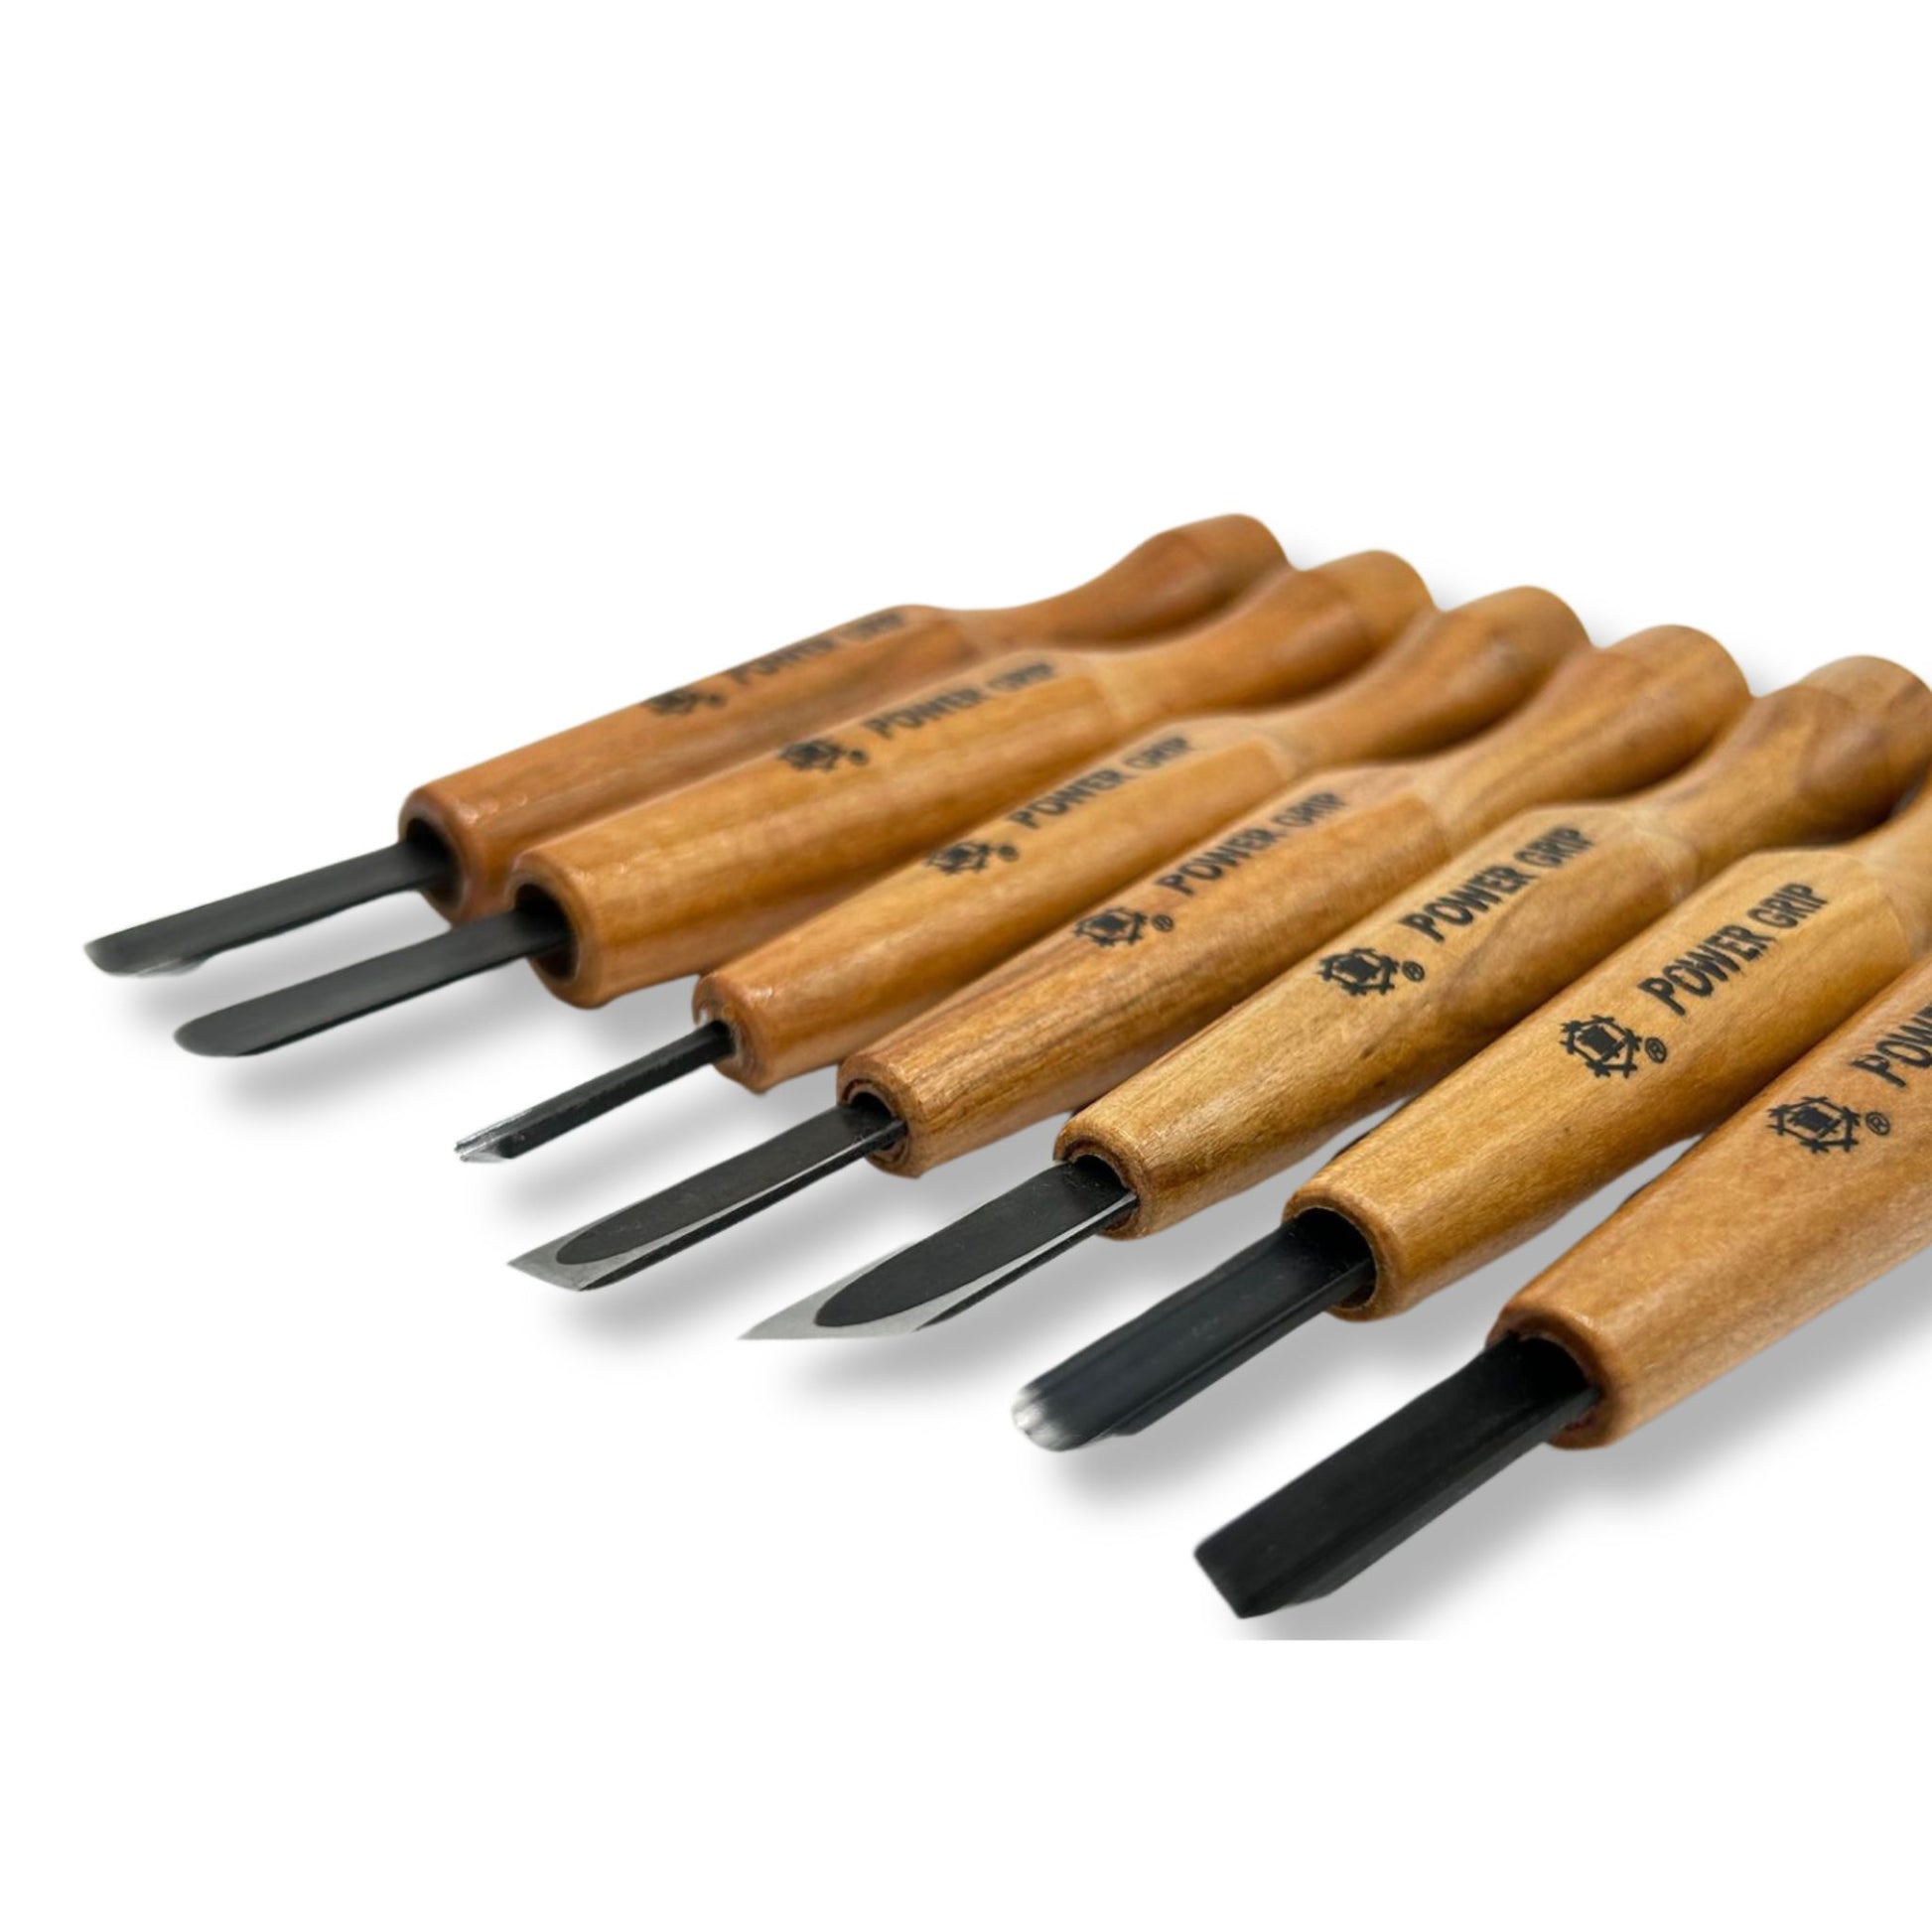 Mikisyo POWER GRIP Wood Carving Chisels & Gouges, 7 pieces Set